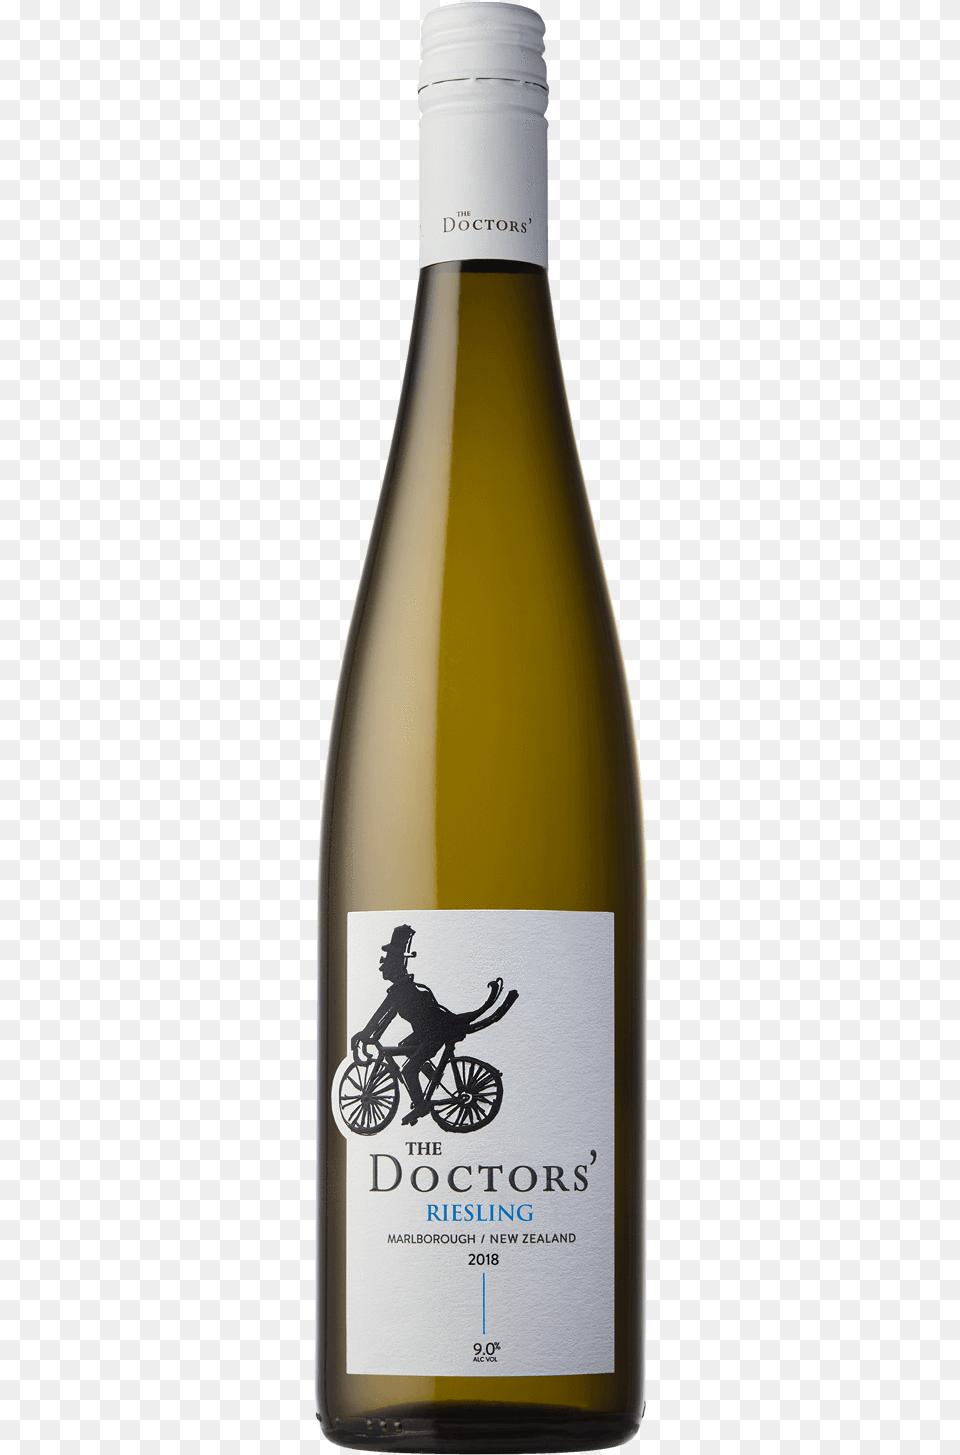 2018 The Doctors39 Riesling Glass Bottle, Wine Bottle, Alcohol, Wine, Beverage Free Png Download